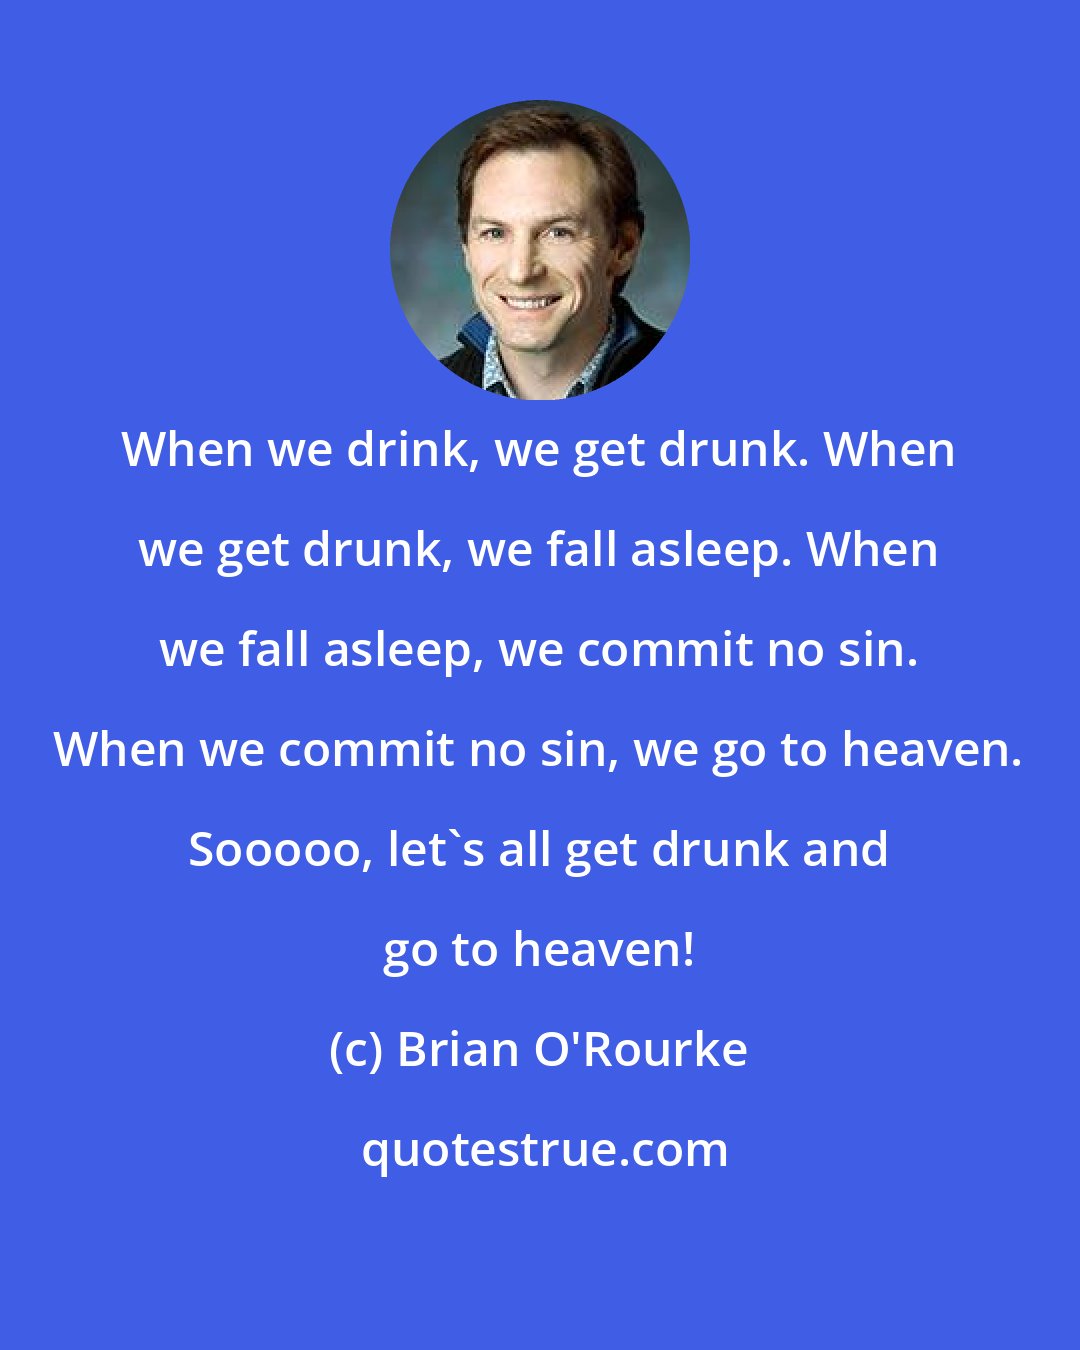 Brian O'Rourke: When we drink, we get drunk. When we get drunk, we fall asleep. When we fall asleep, we commit no sin. When we commit no sin, we go to heaven. Sooooo, let's all get drunk and go to heaven!